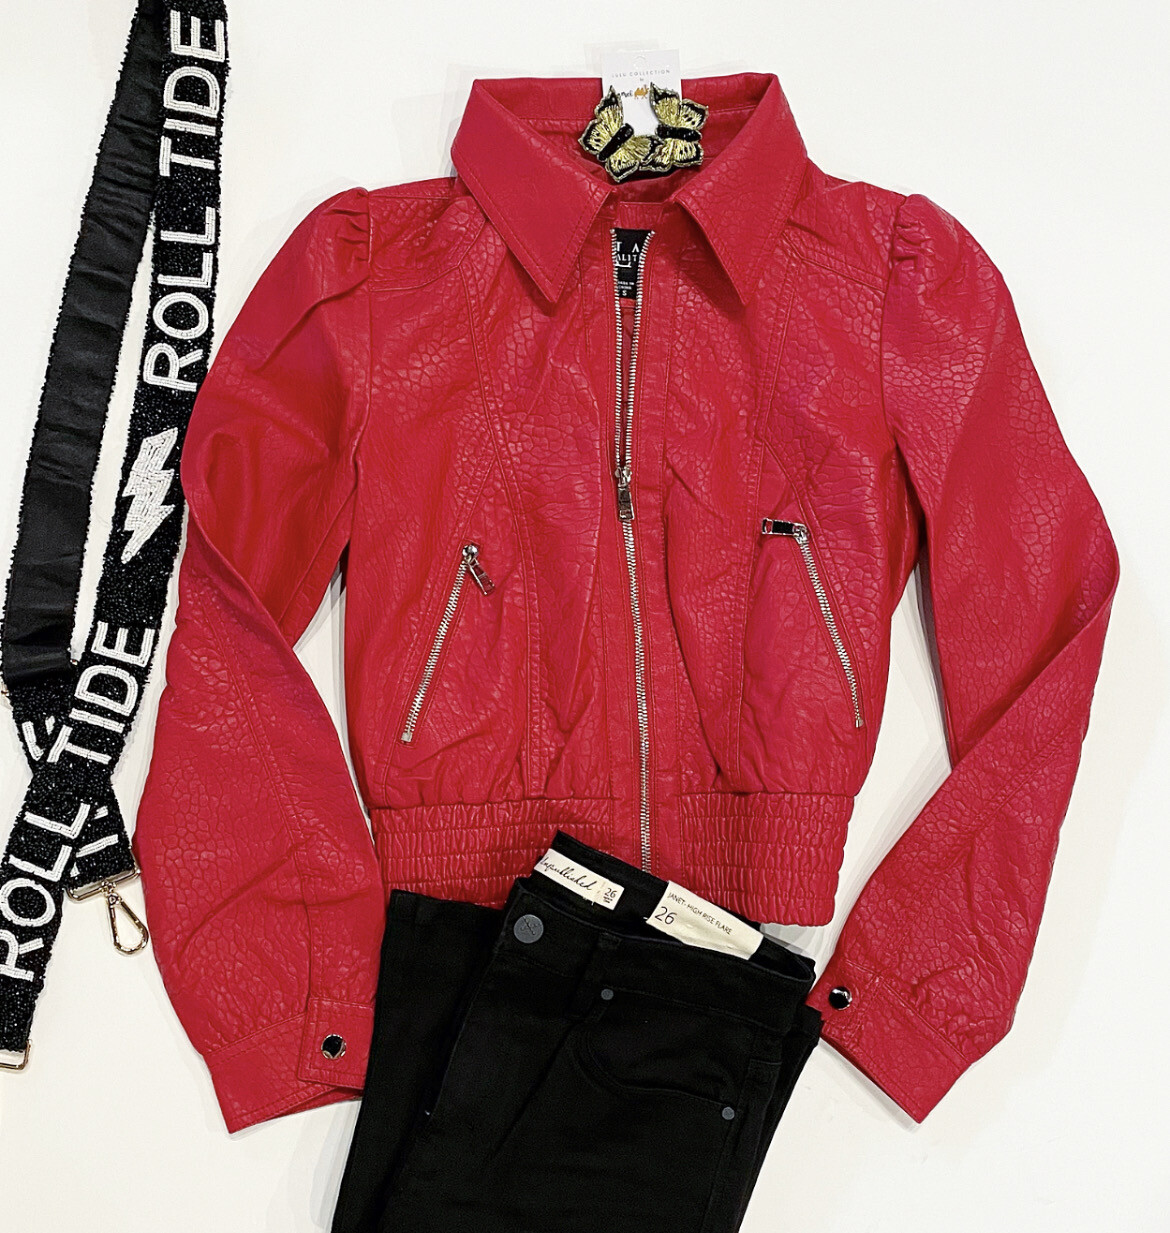 Racy Red Textured Jacket